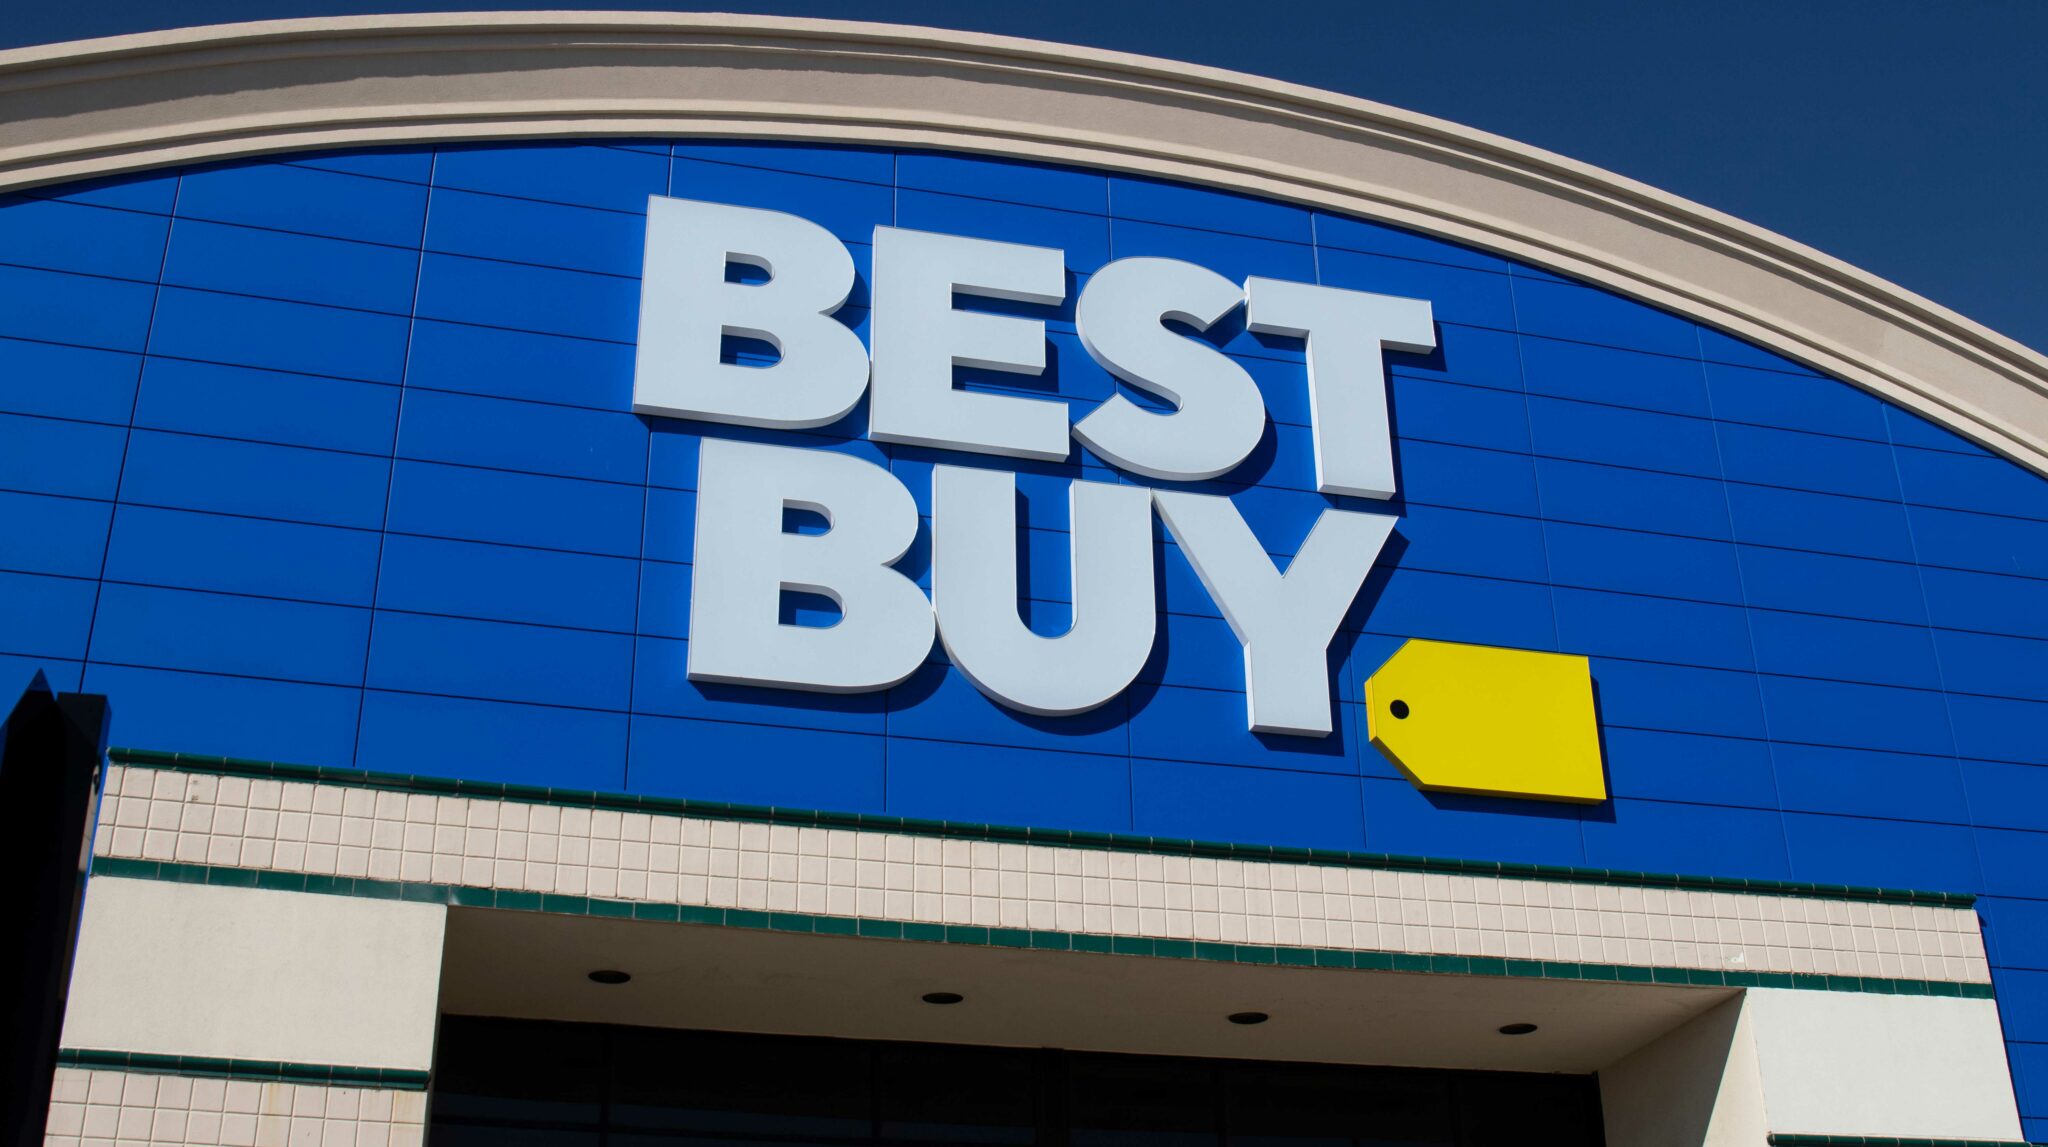 Best Buy’s Fall Tech Essentials sale discounts several Sony TVs